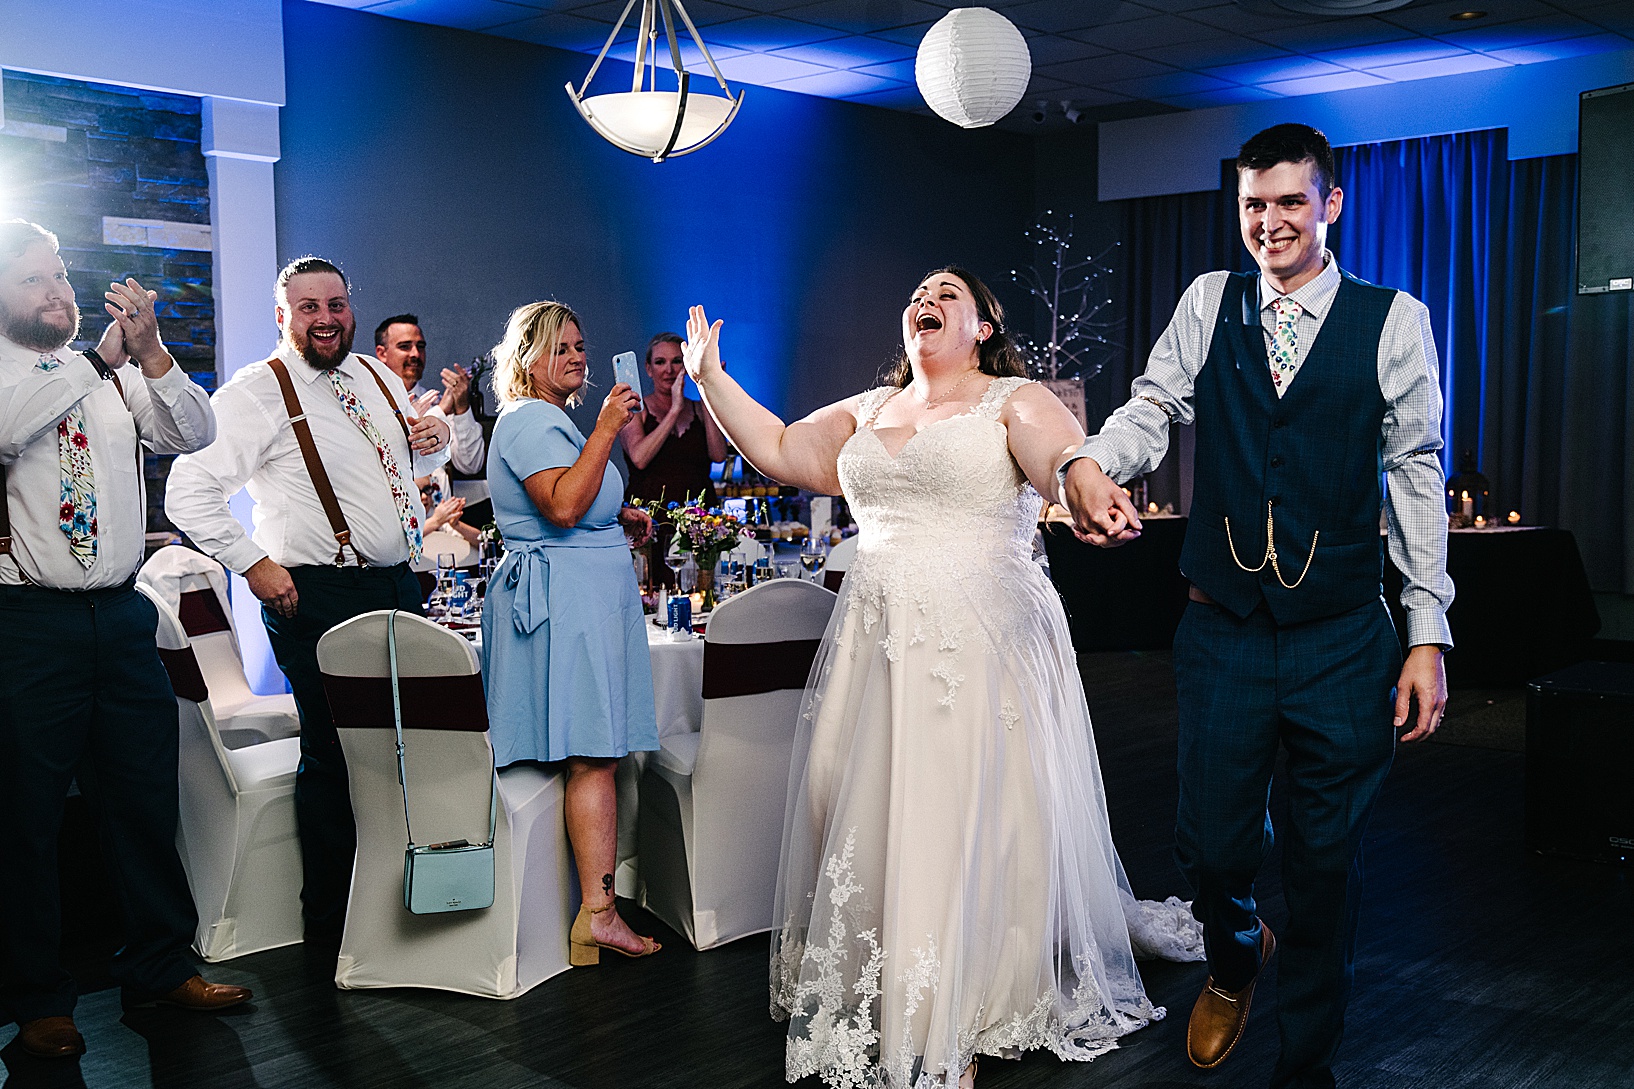 Guests stand and clap as bride and groom enter reception holding hands